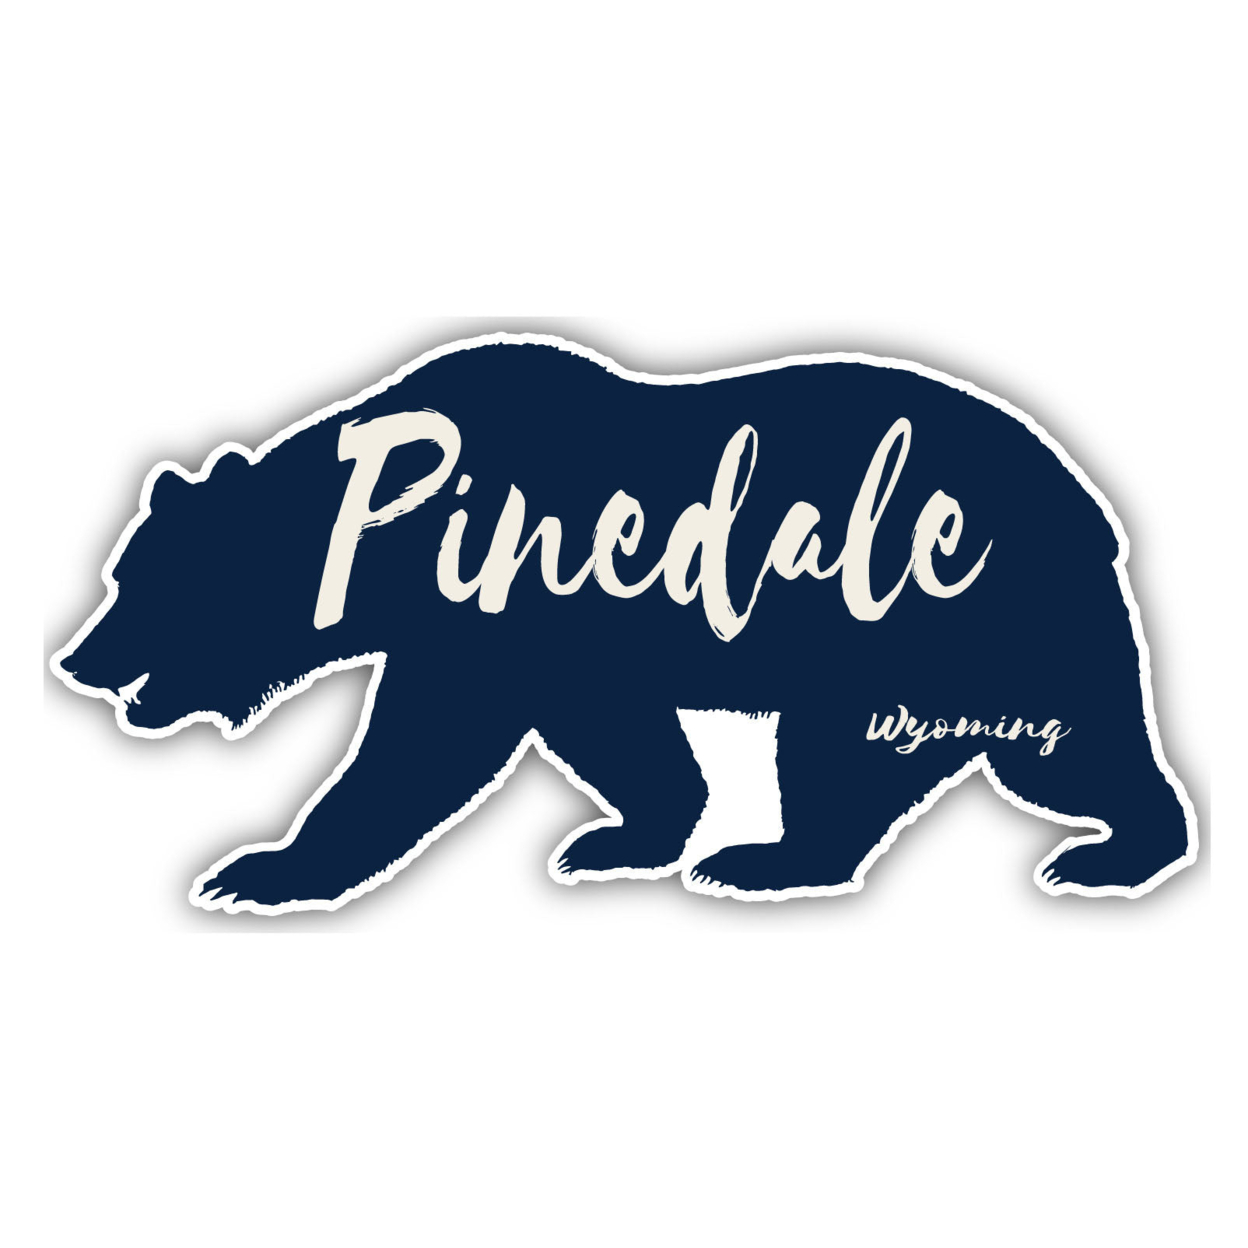 Pinedale Wyoming Souvenir Decorative Stickers (Choose Theme And Size) - Single Unit, 2-Inch, Tent